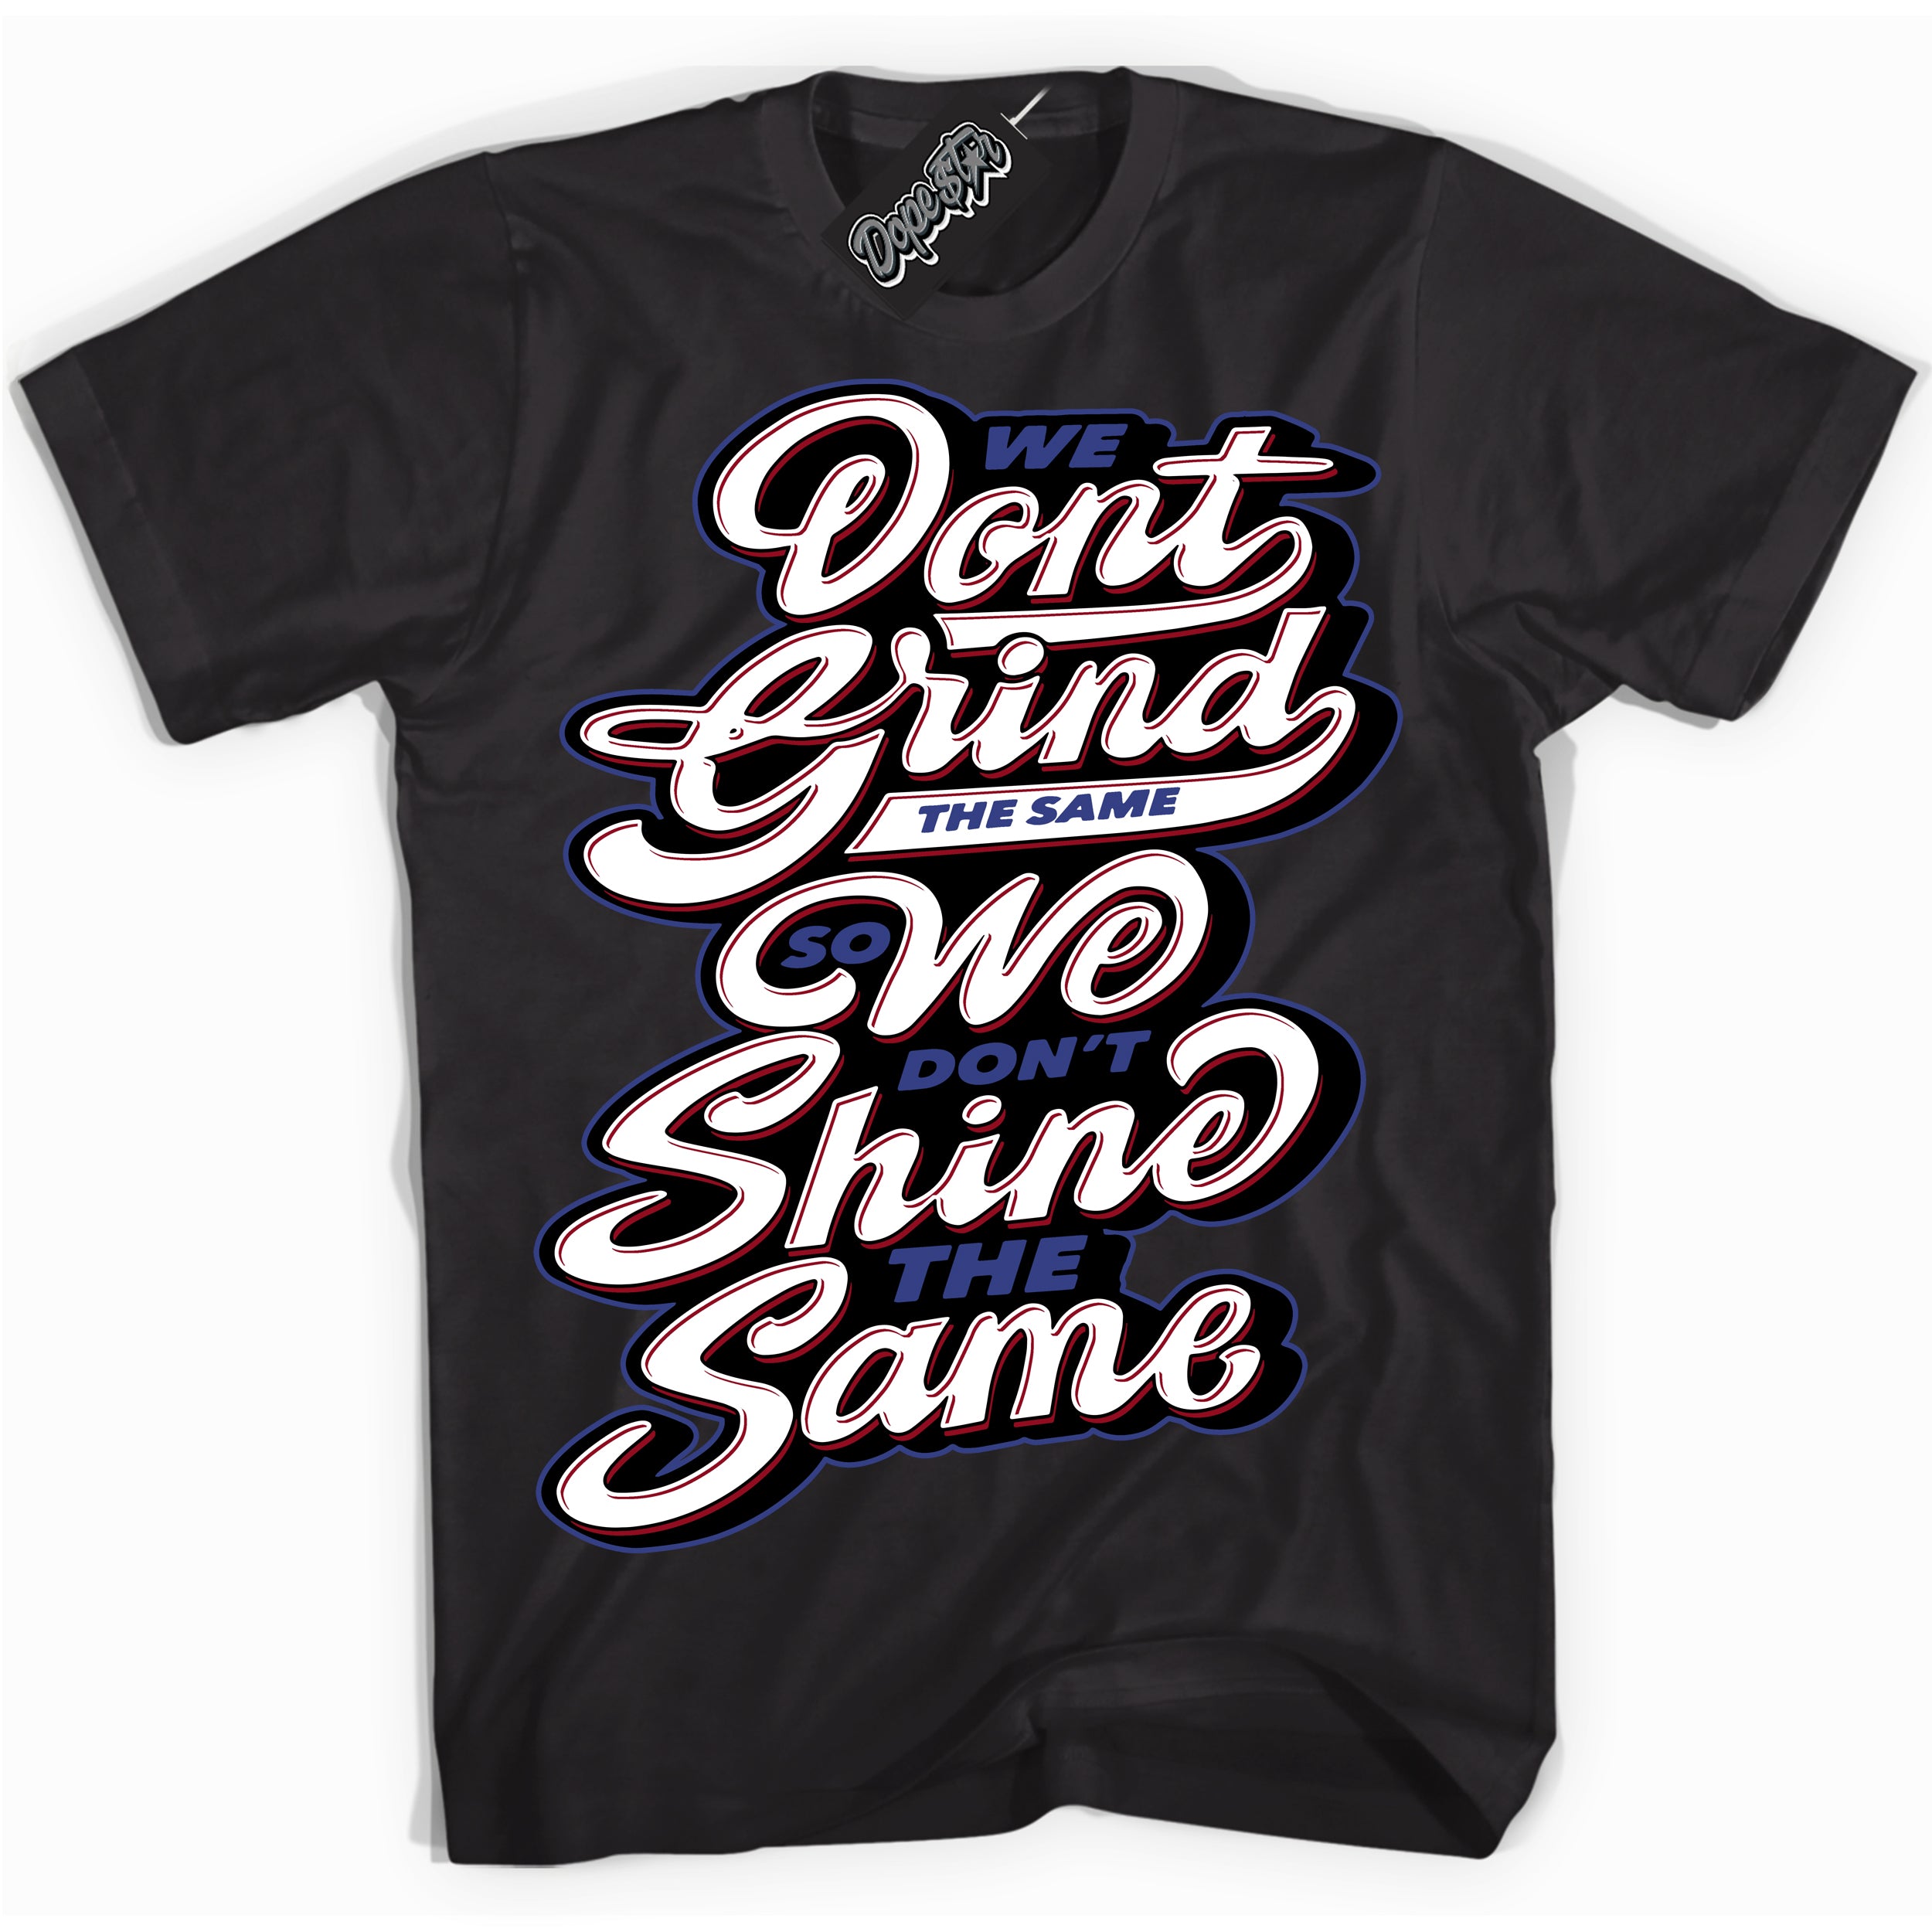 Cool Black Shirt with “ Grind Shine ” design that perfectly matches Playoffs 8s Sneakers.